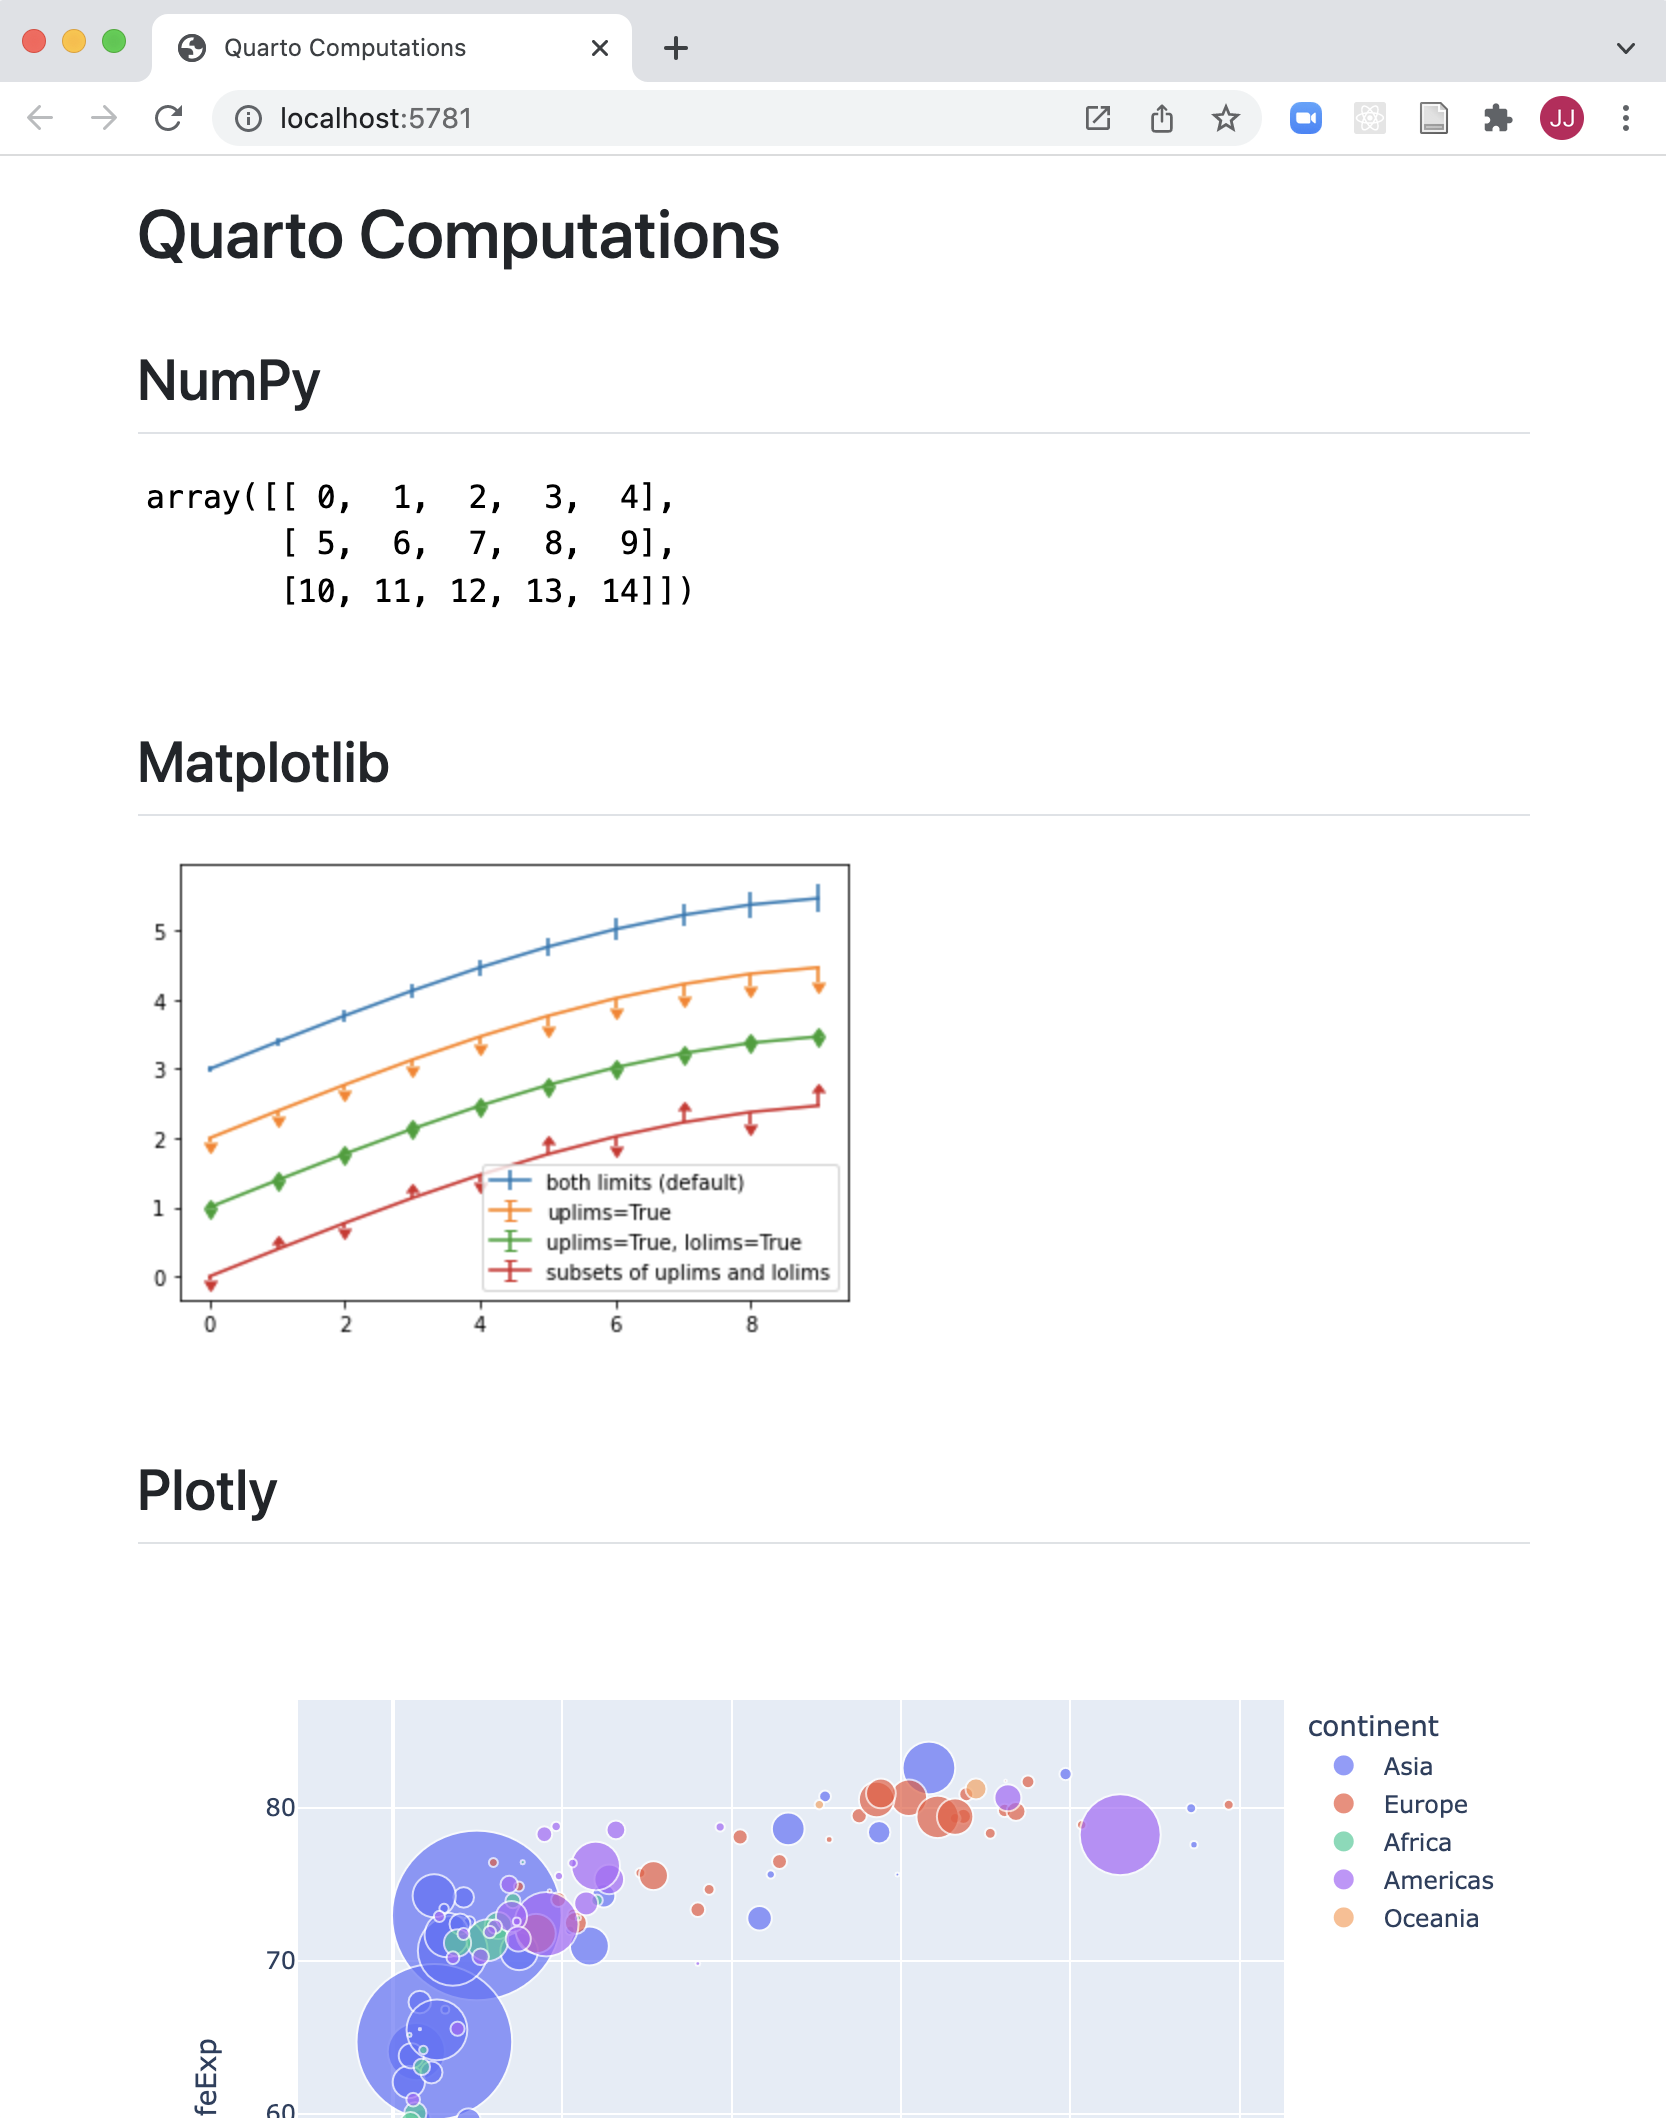 Output of computations.qmd with 'echo: false' set, shows Title, resulting array in NumPy section, line chart in Matplotlib section, and interactive bubble chart in Plotly section.